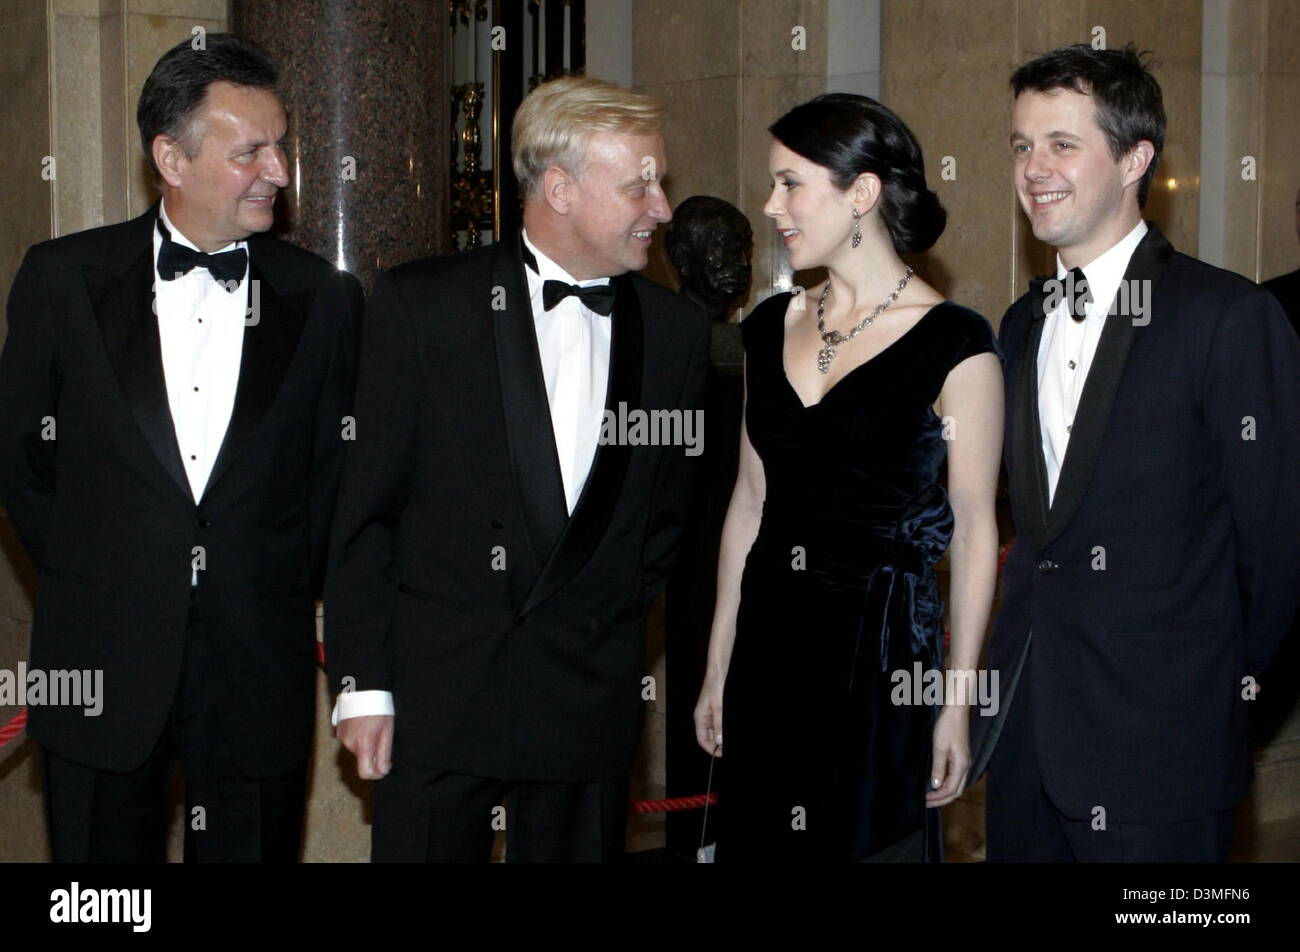 Denmark's Crown Prince Frederik (R) and his wife Crown Princess Mary (2nd R) stand next to Hamburg's mayor Ole von Beust (CDU) and Michael Frenzel (L), chairman of tourism company TUI,  ahead of the traditional Matthiae meal at the town hall in Hamburg, Germany, Friday, 17 February 2006. The Danish Crown Prince and Crown Princess were invited as guest of honour to the traditional m Stock Photo